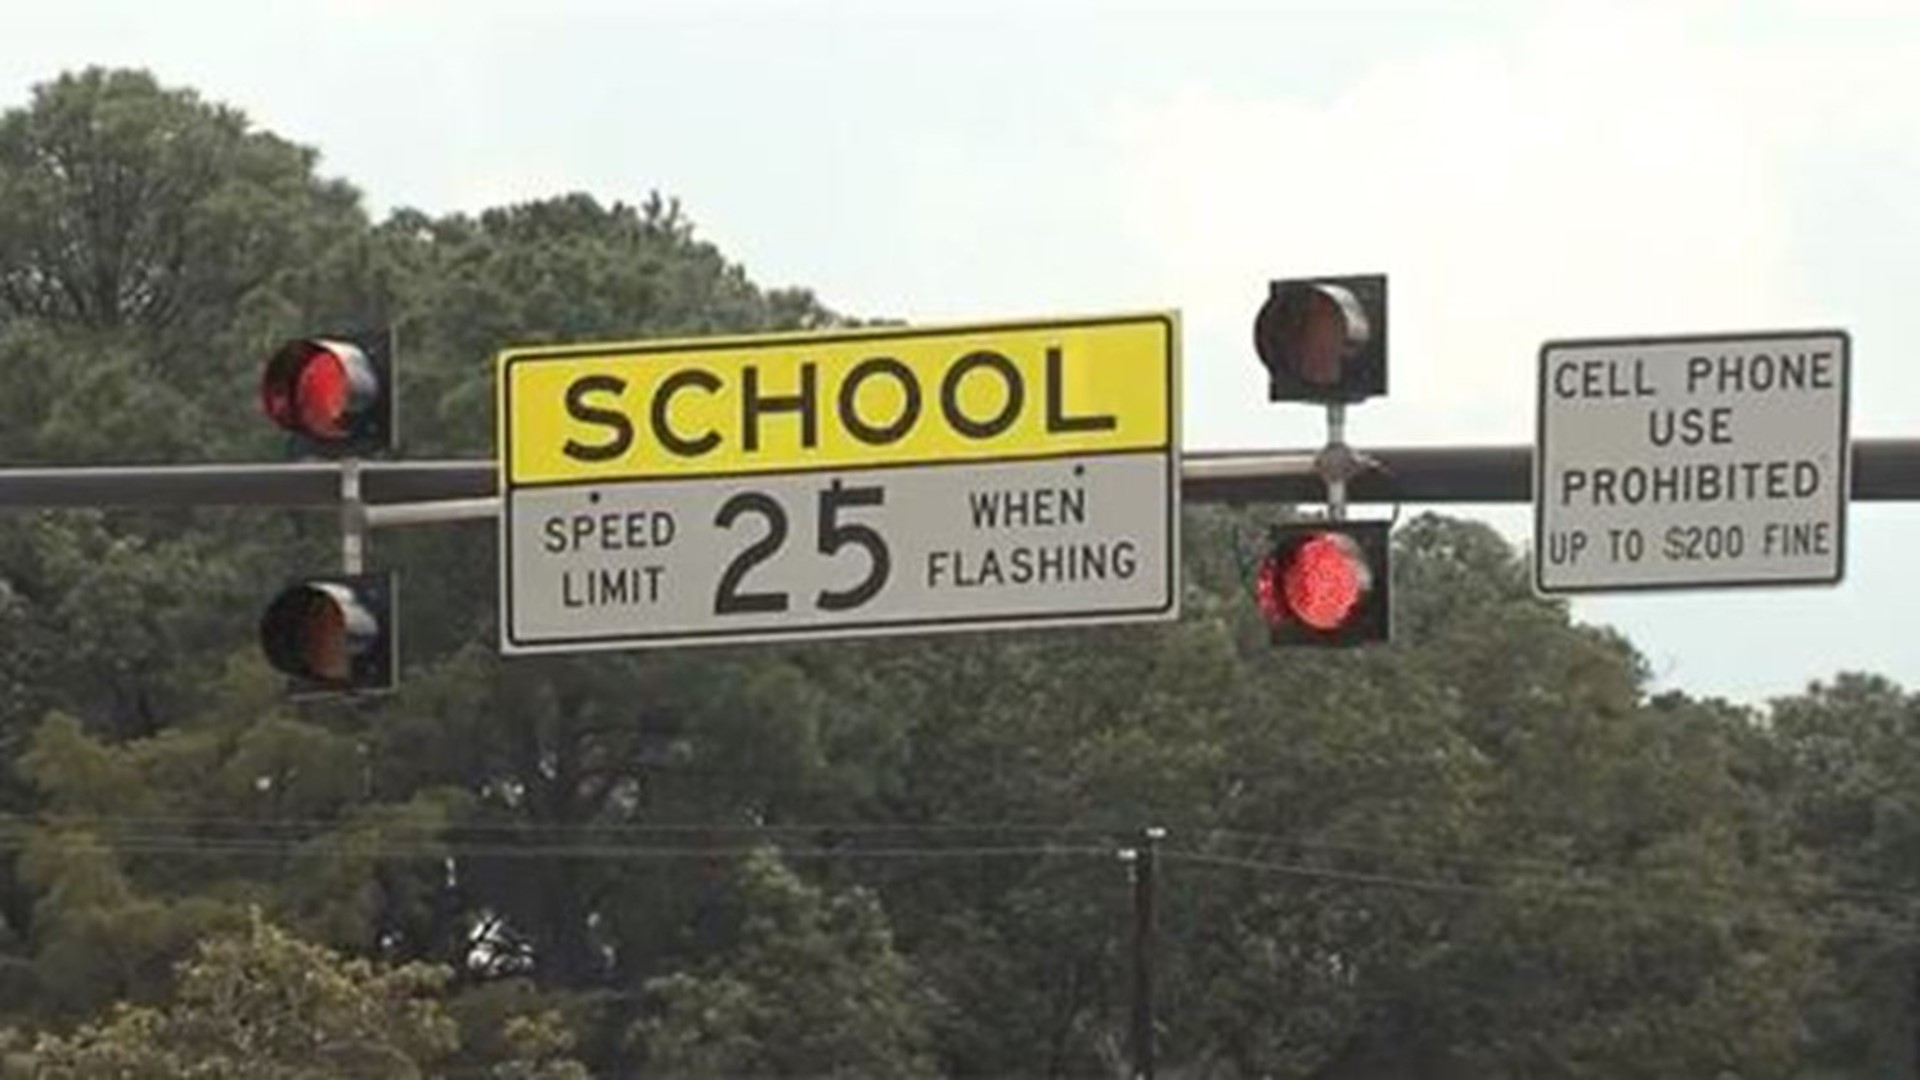 Each year we get asked, "do you have to slow down in a school zone during the summer?”